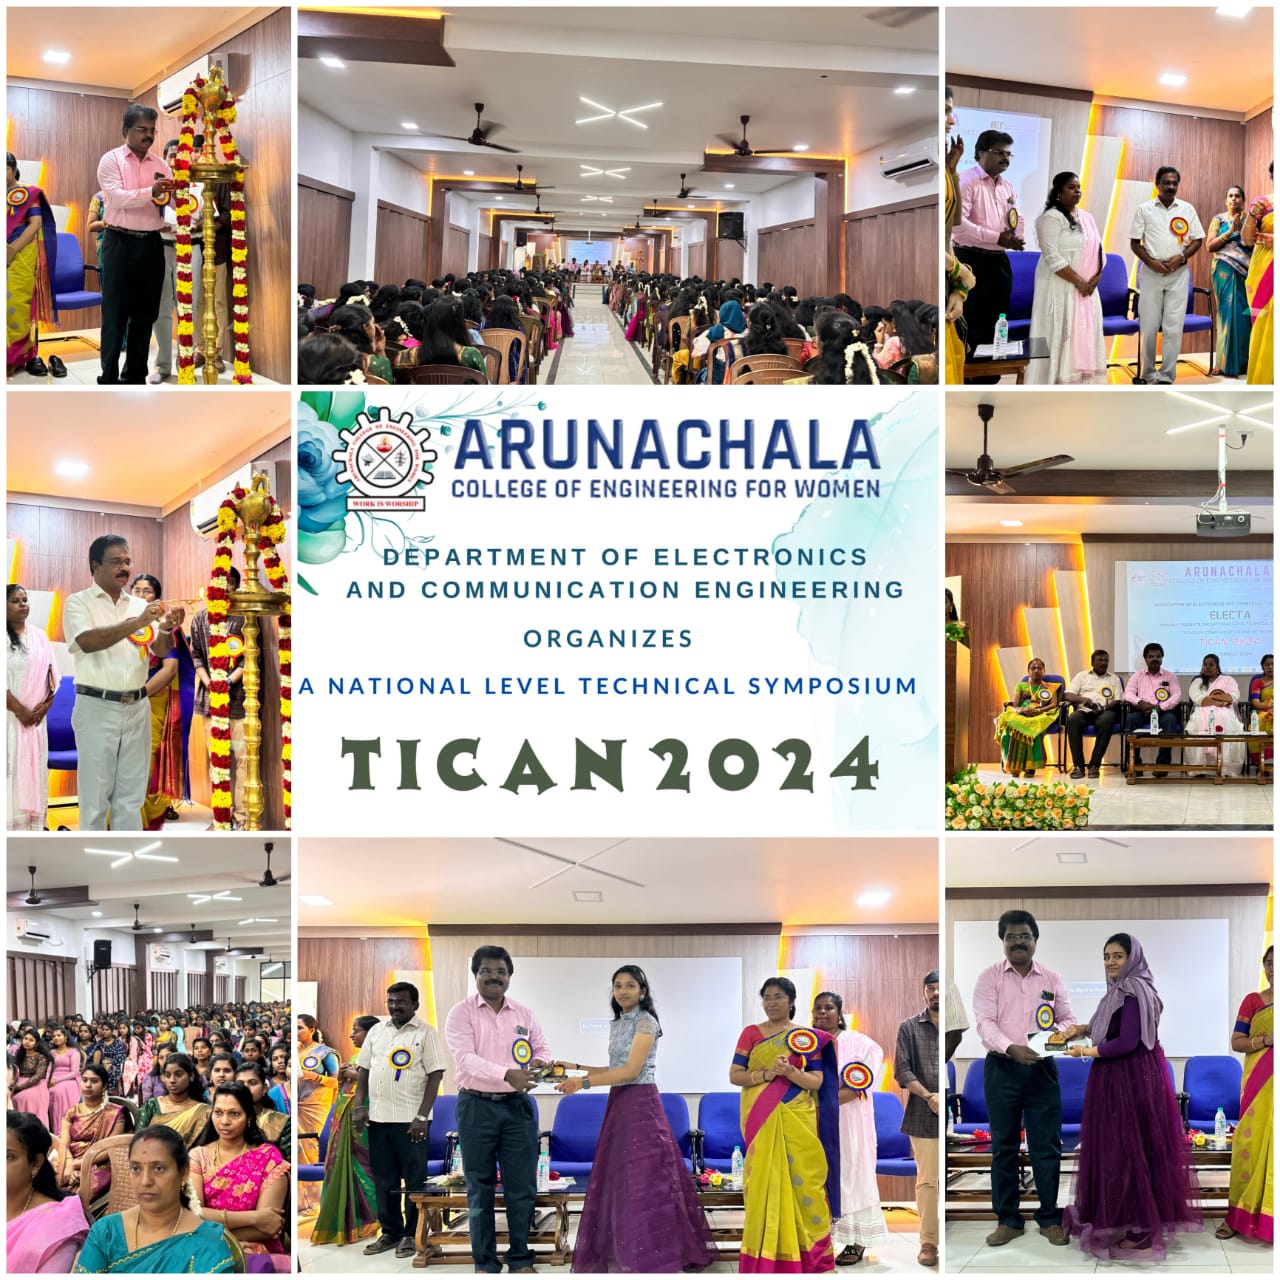 Electa Proudly Presents TICAN 2k24 A National Level Technical Symposium organised by Department of Electronics and Communication Engineering